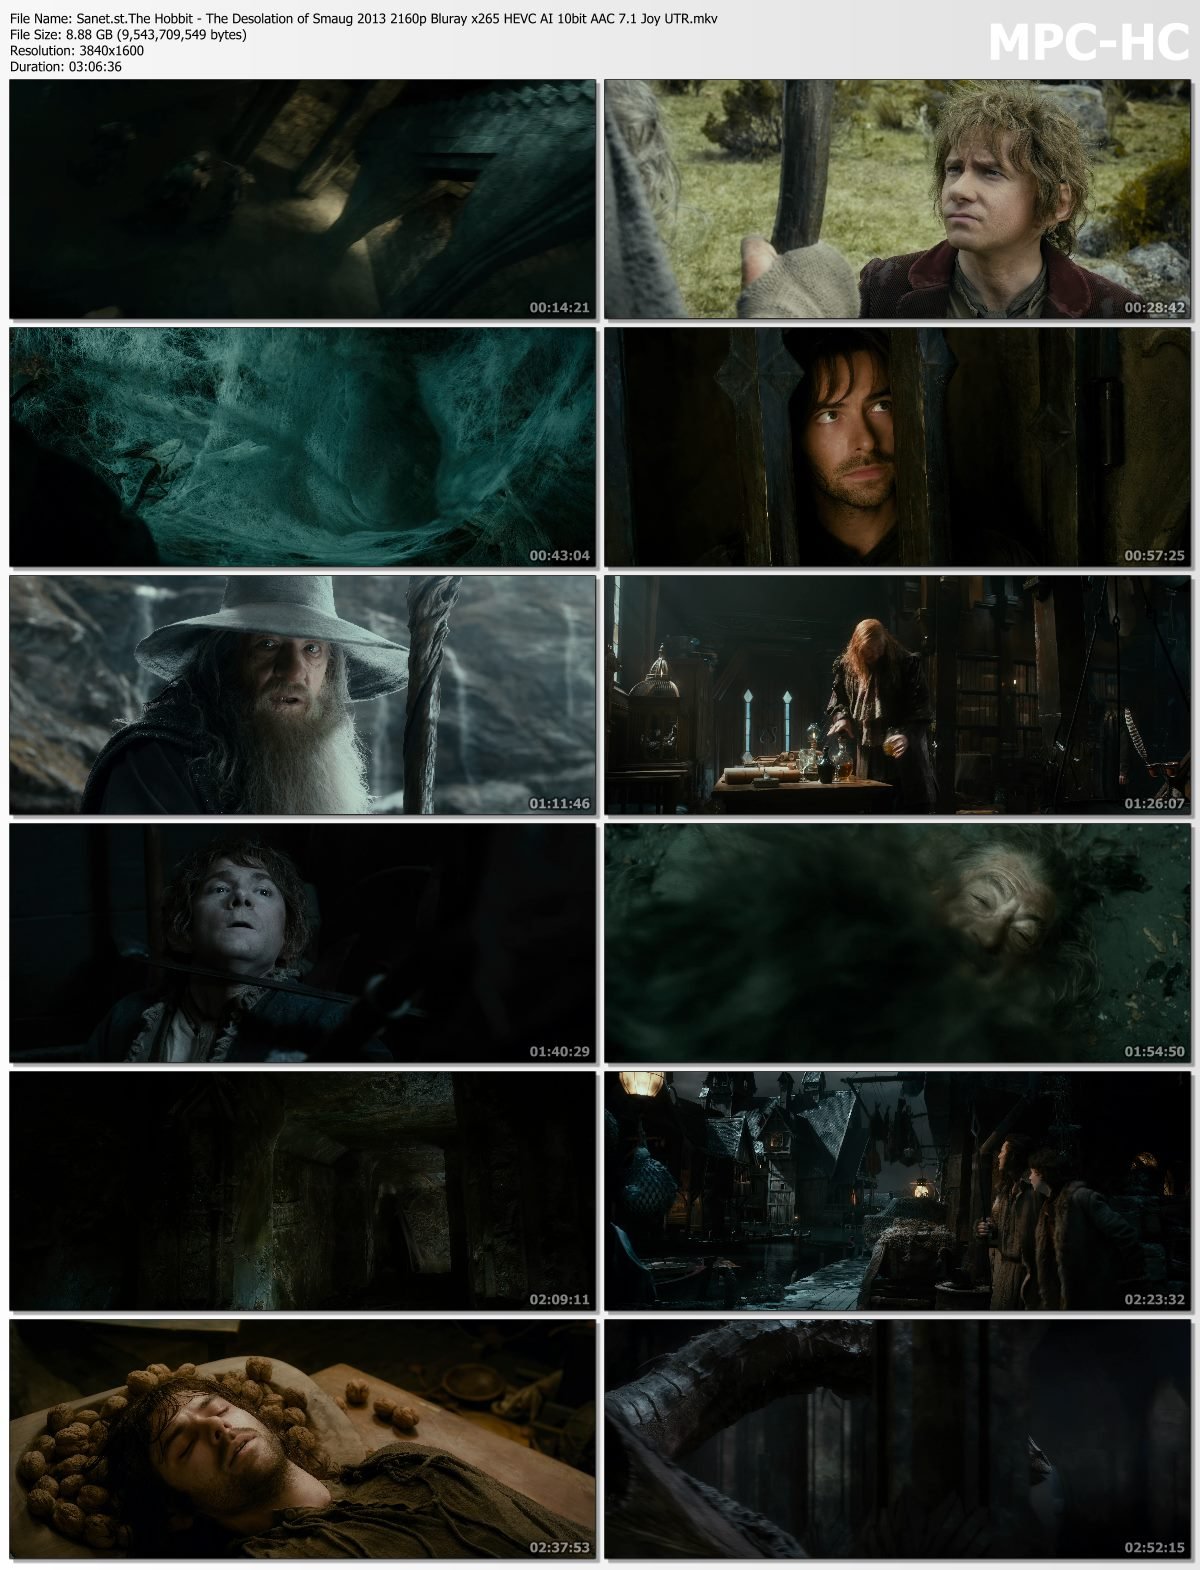 download the new for android The Hobbit: The Desolation of Smaug